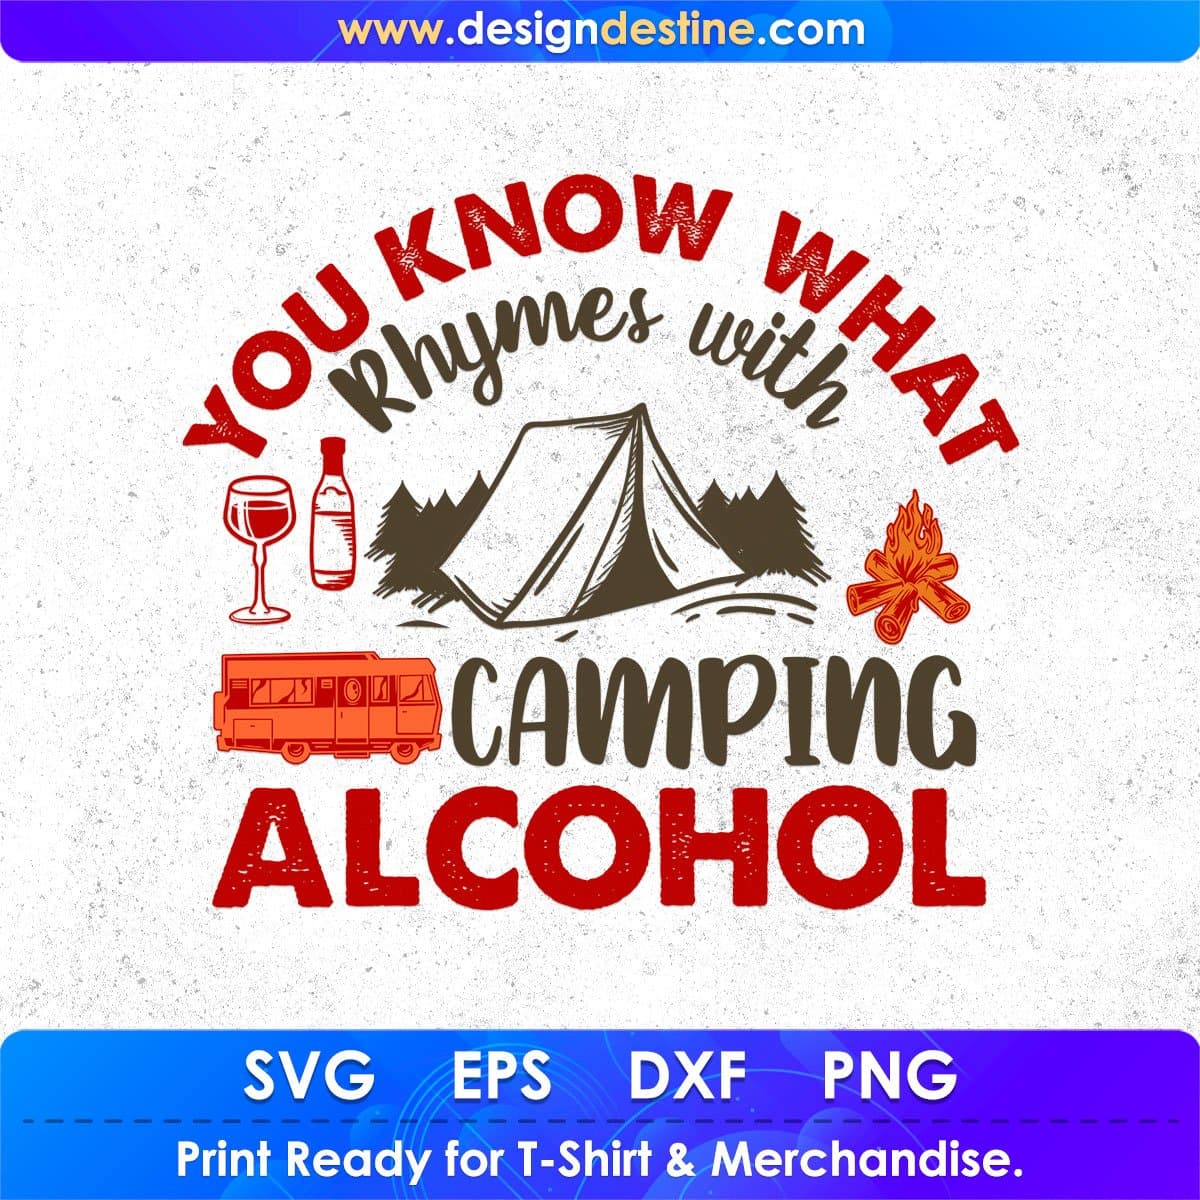 You Know What Rhymes With Camping Alcohol T shirt Design In Svg Png Cutting Printable Files